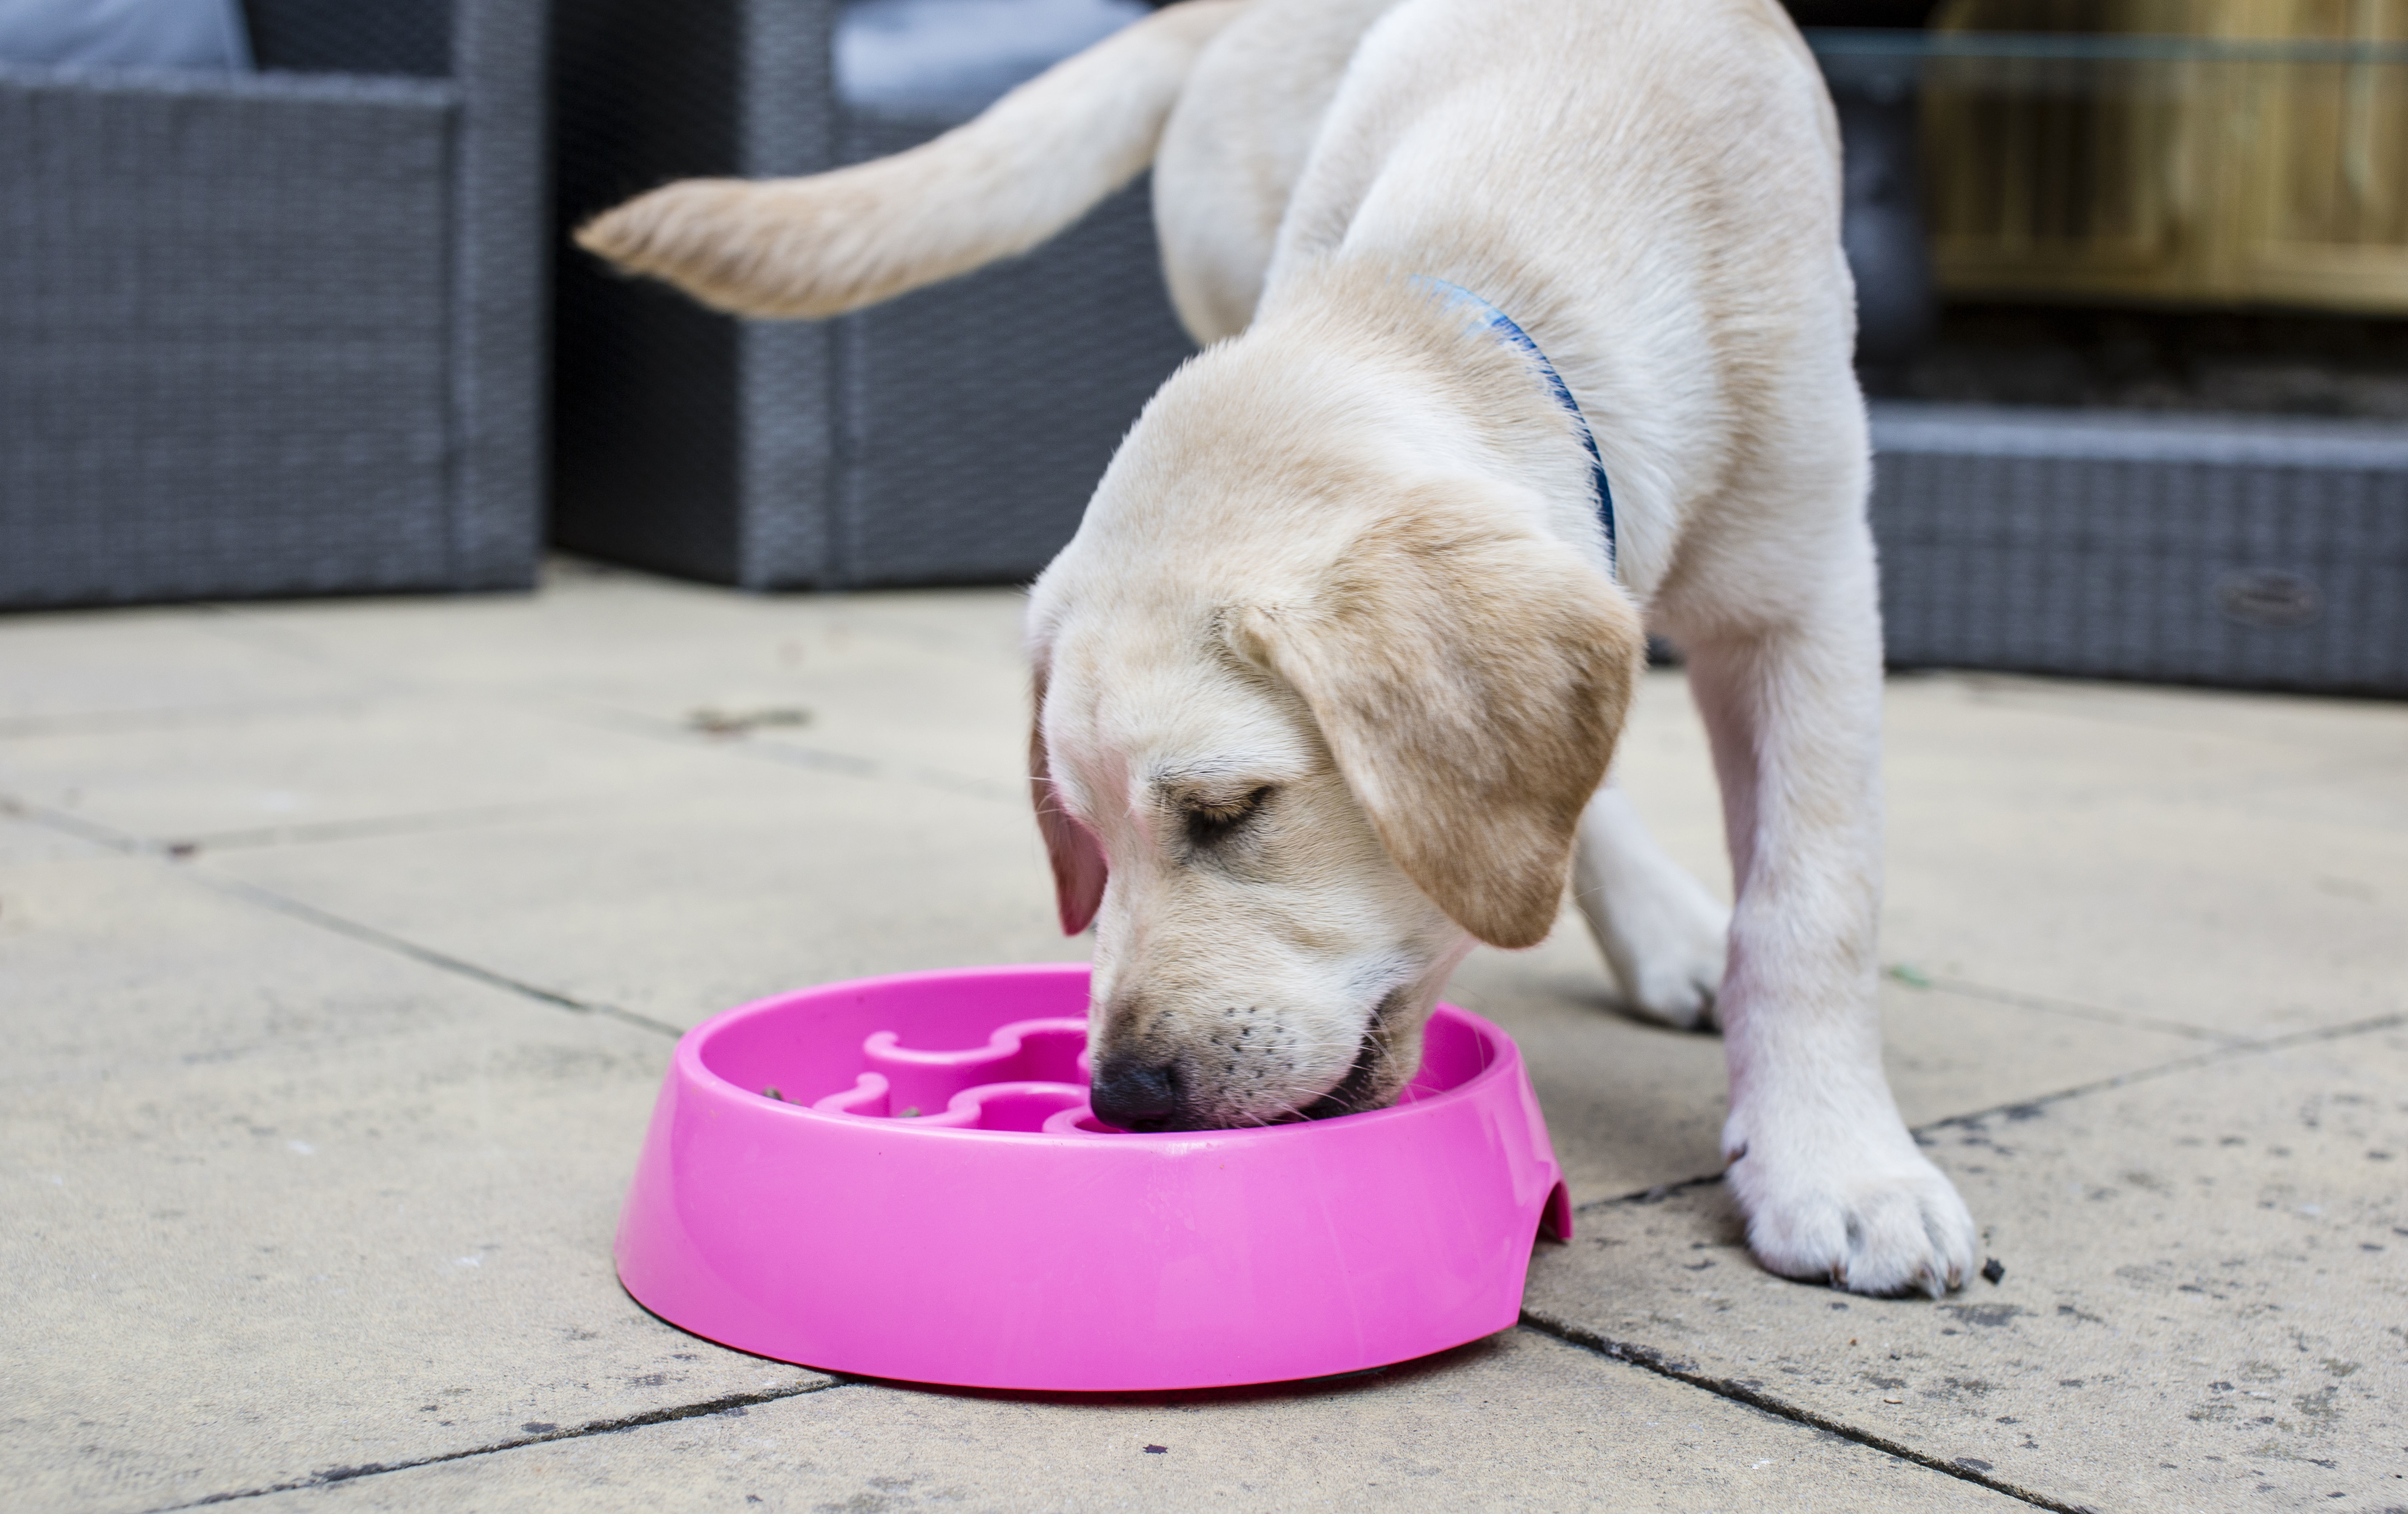 a yellow Labrador puppy eats from a bright pink bowl